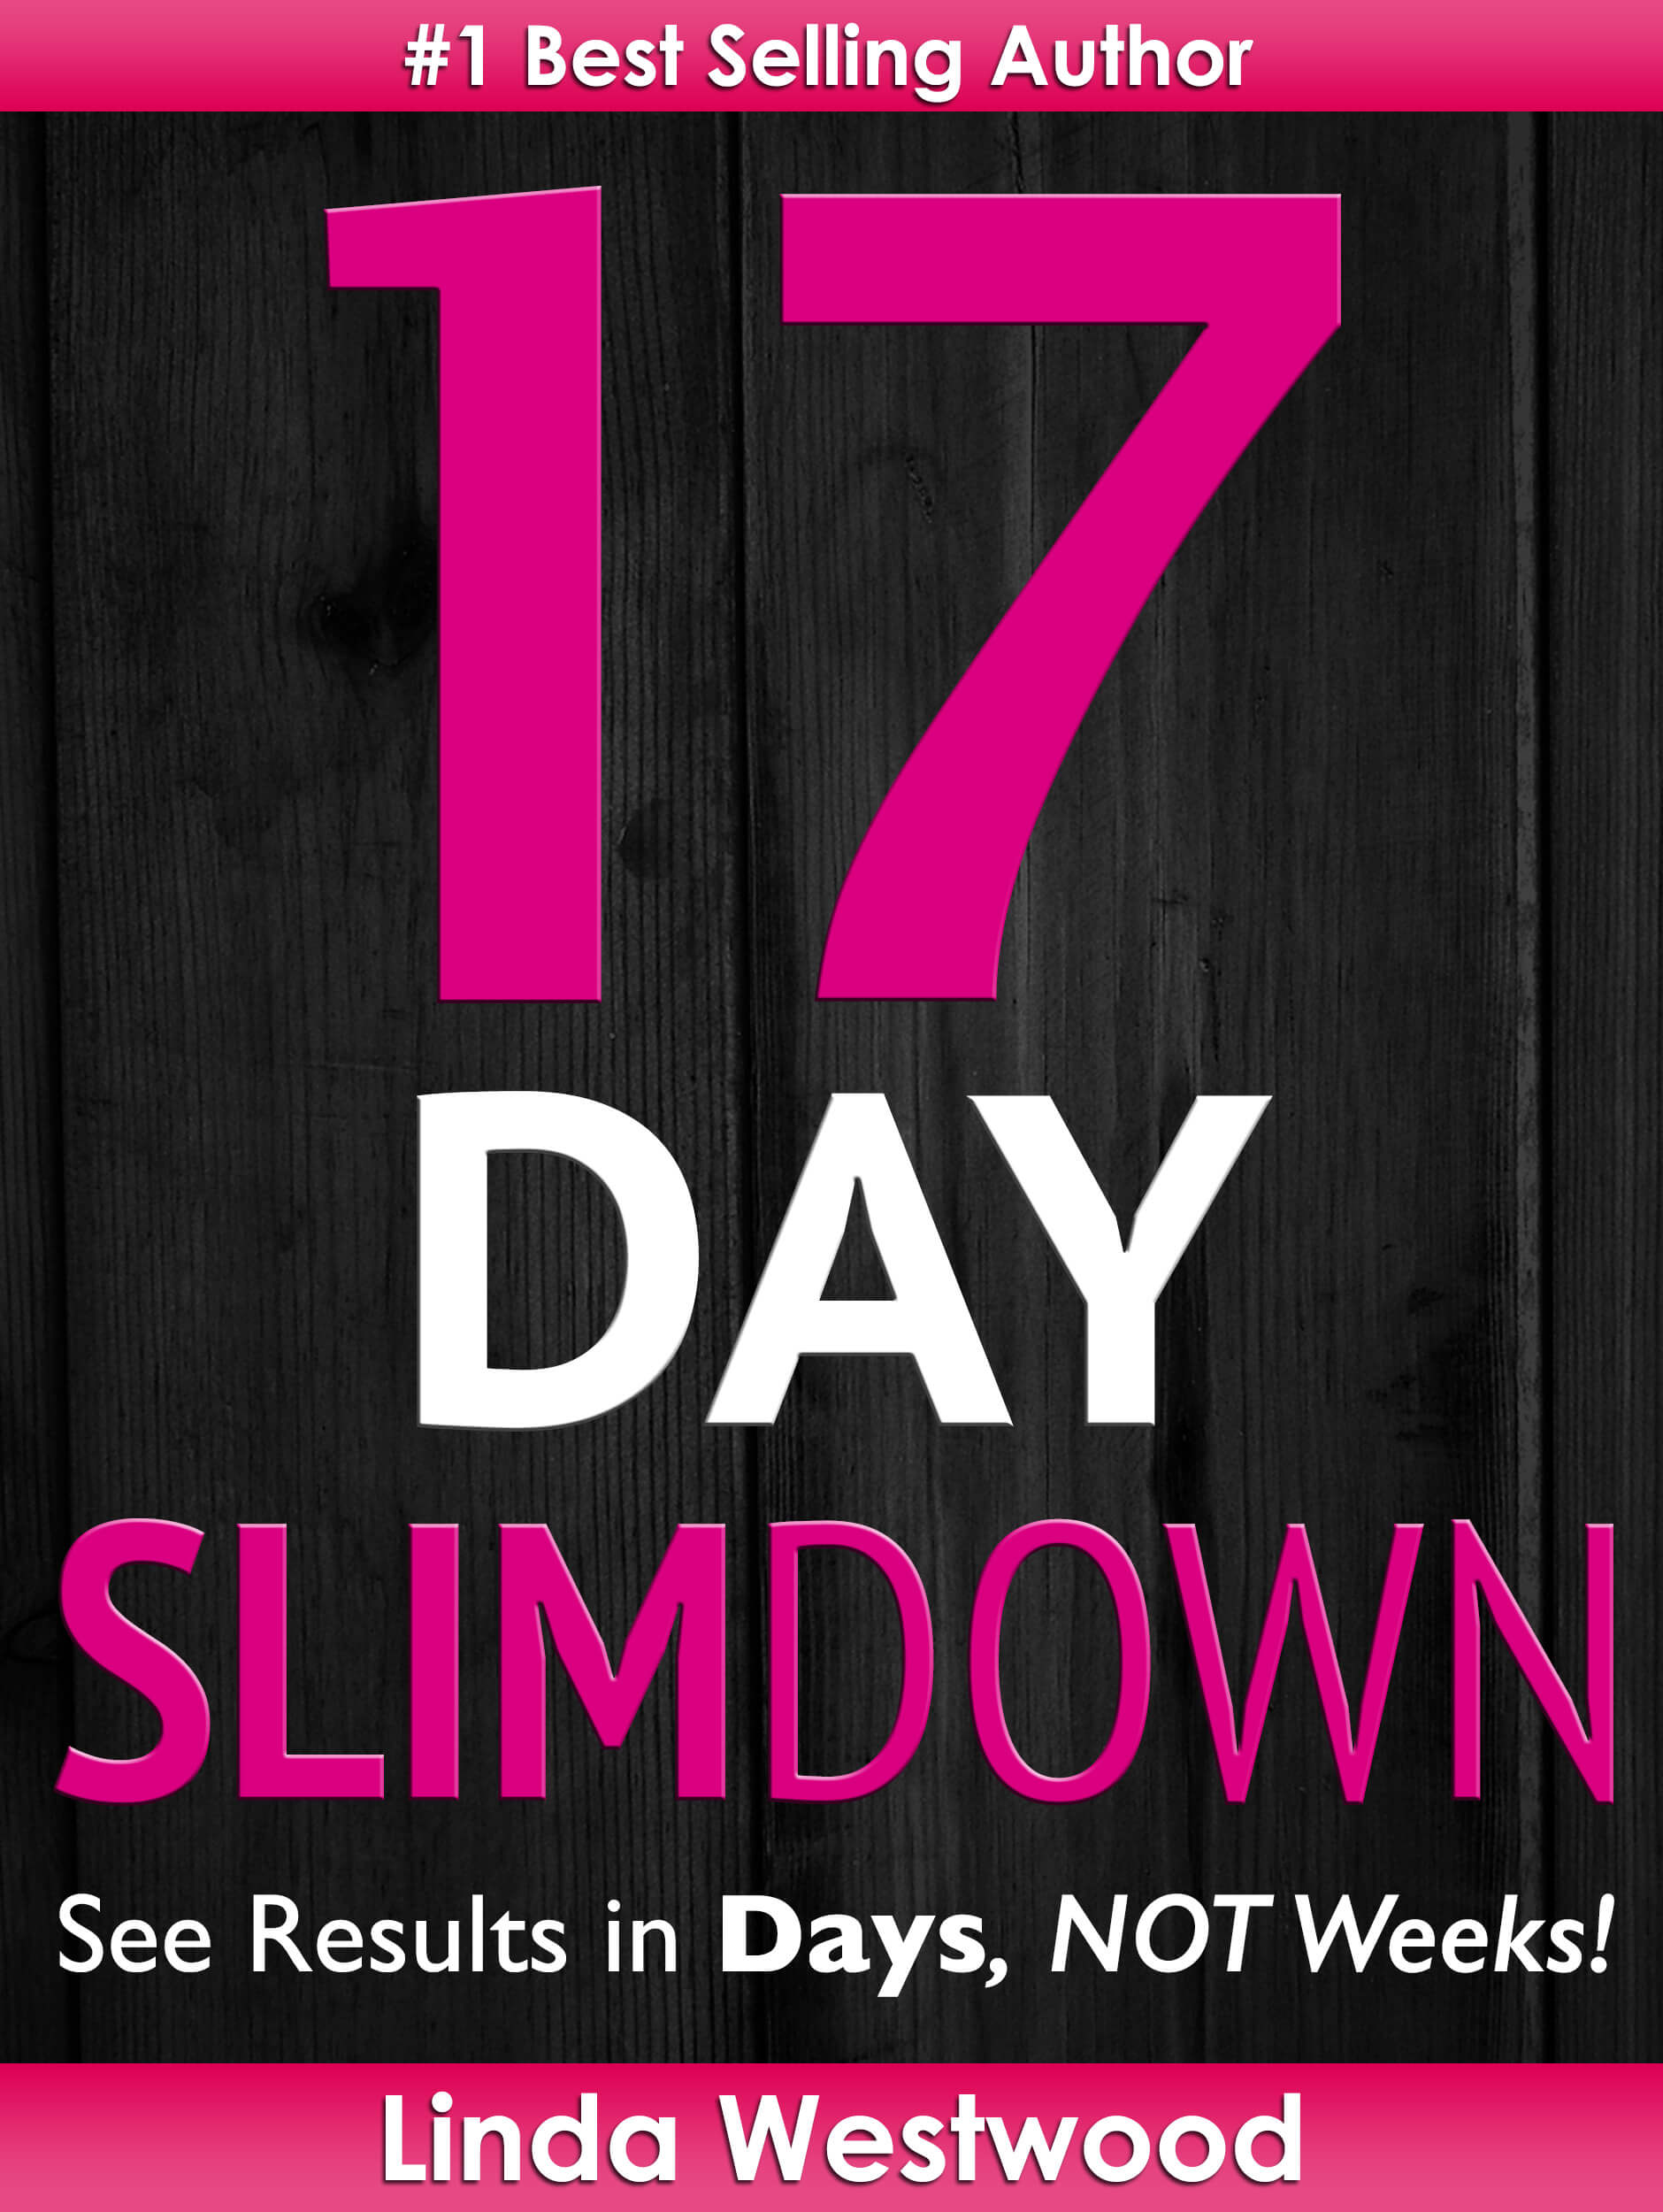 FREE: 17-Day Slim Down (2nd Edition): Flat Abs, Firm Butt & Lean Legs – See Results in Days, NOT Weeks! (Exercise) by Linda Westwood